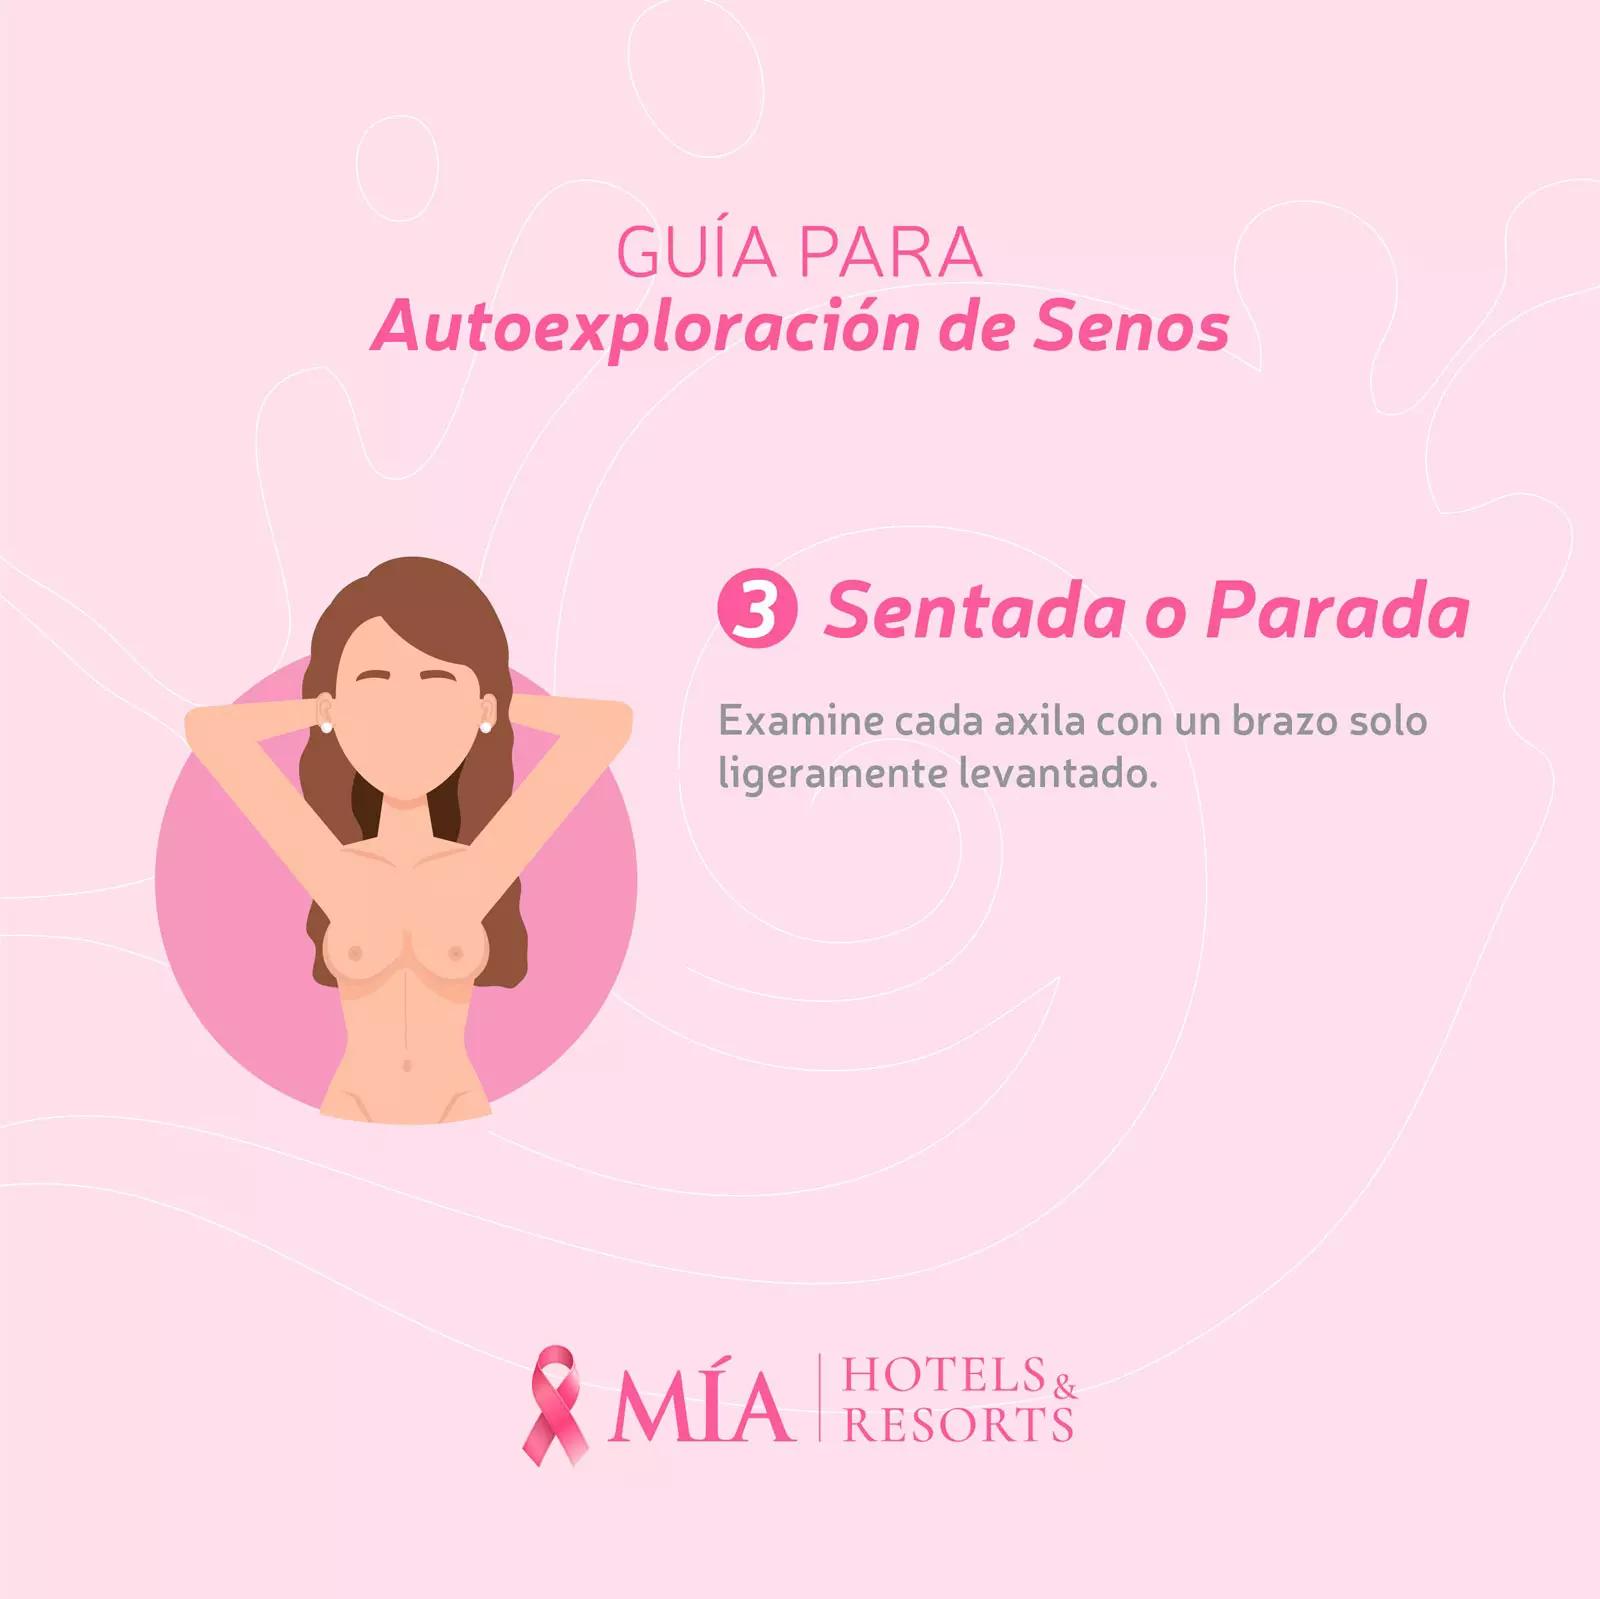 Guide to breast self-exam